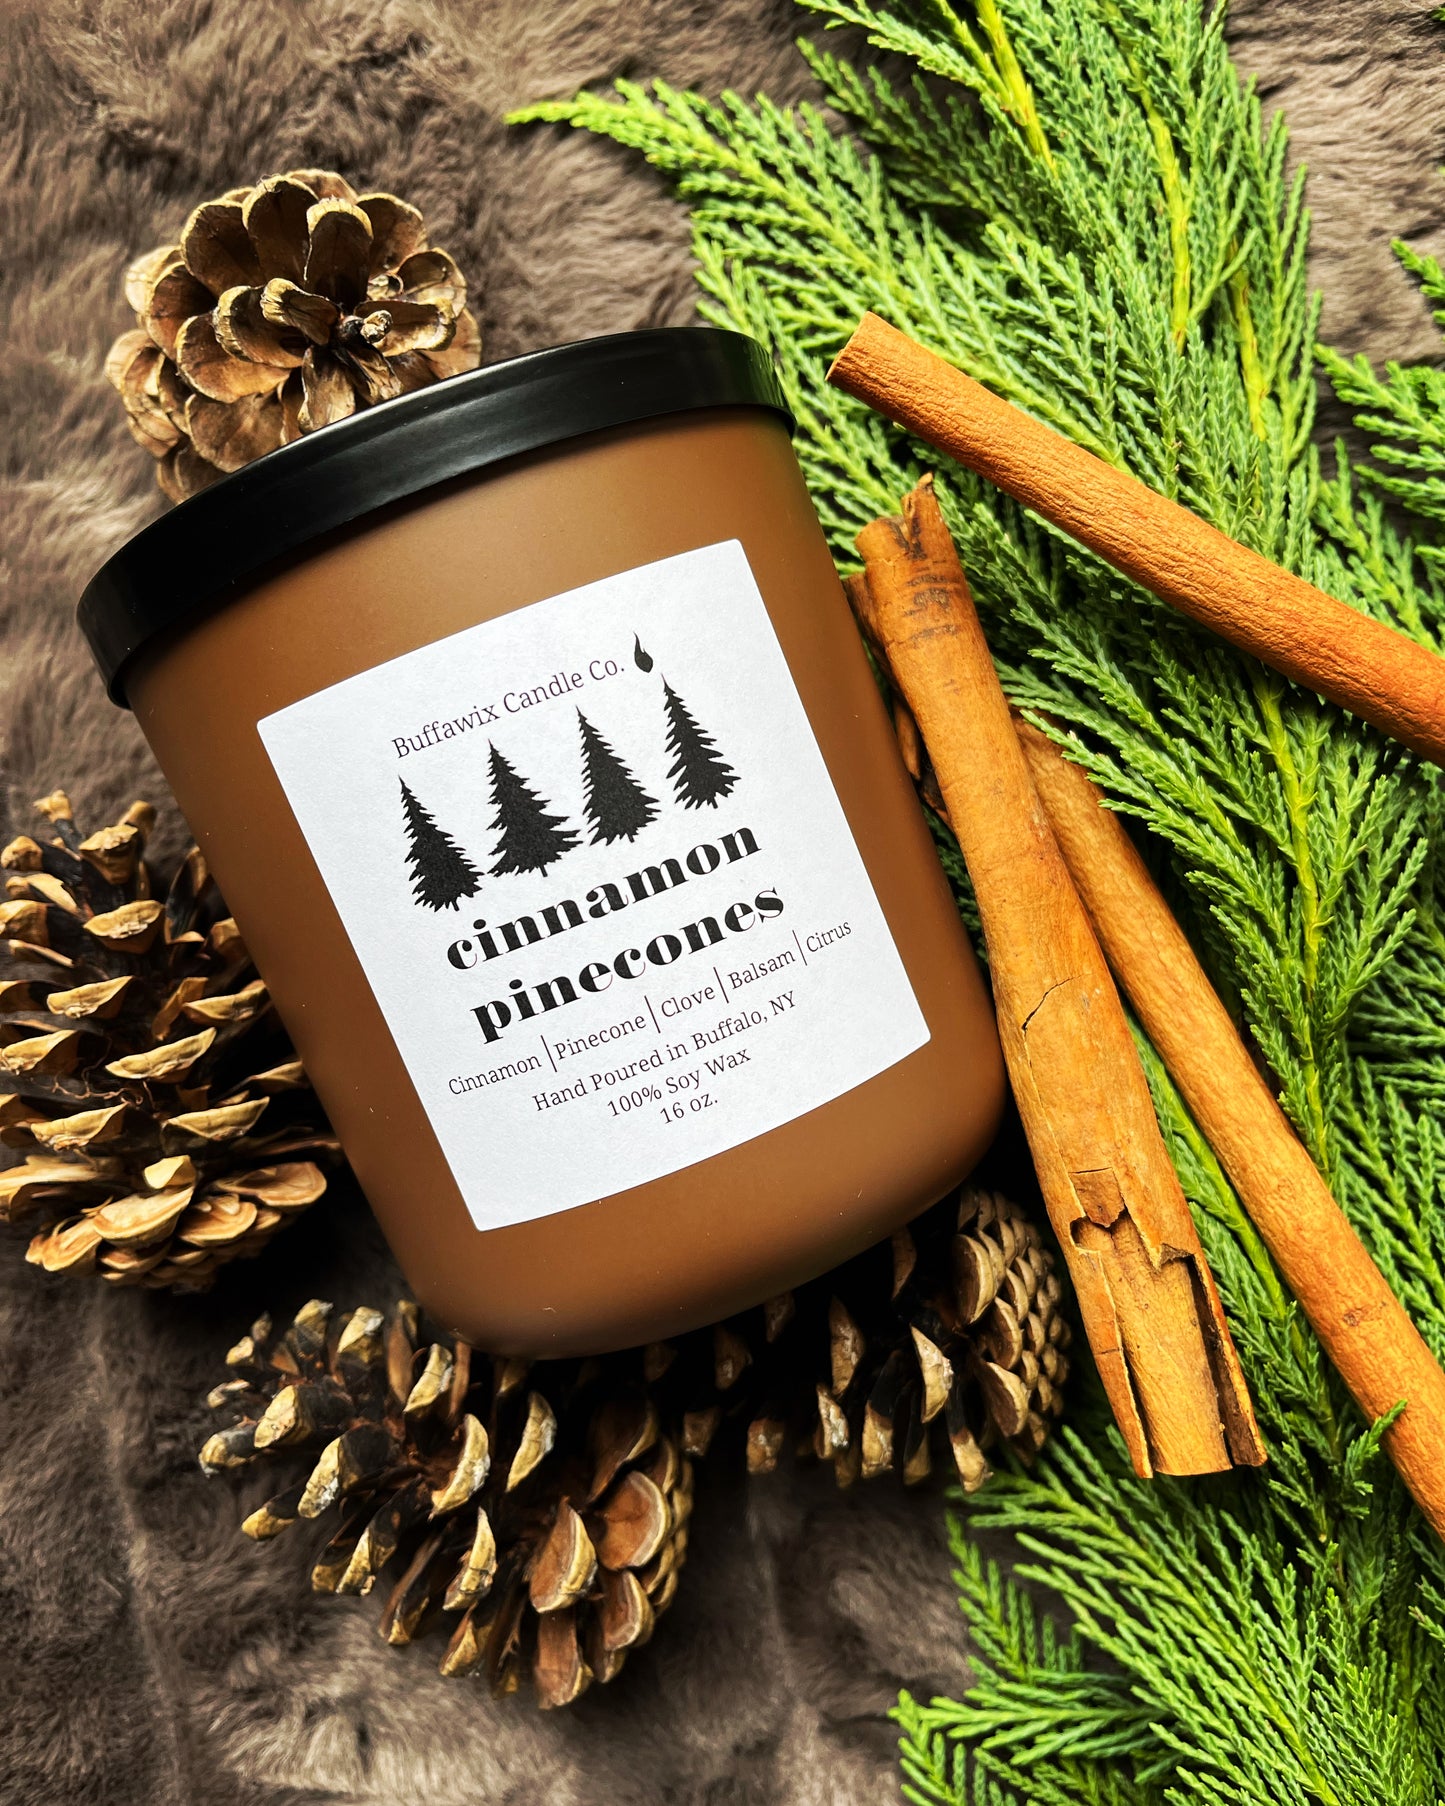 16oz double wick cinnamon pinecone pure soy candle